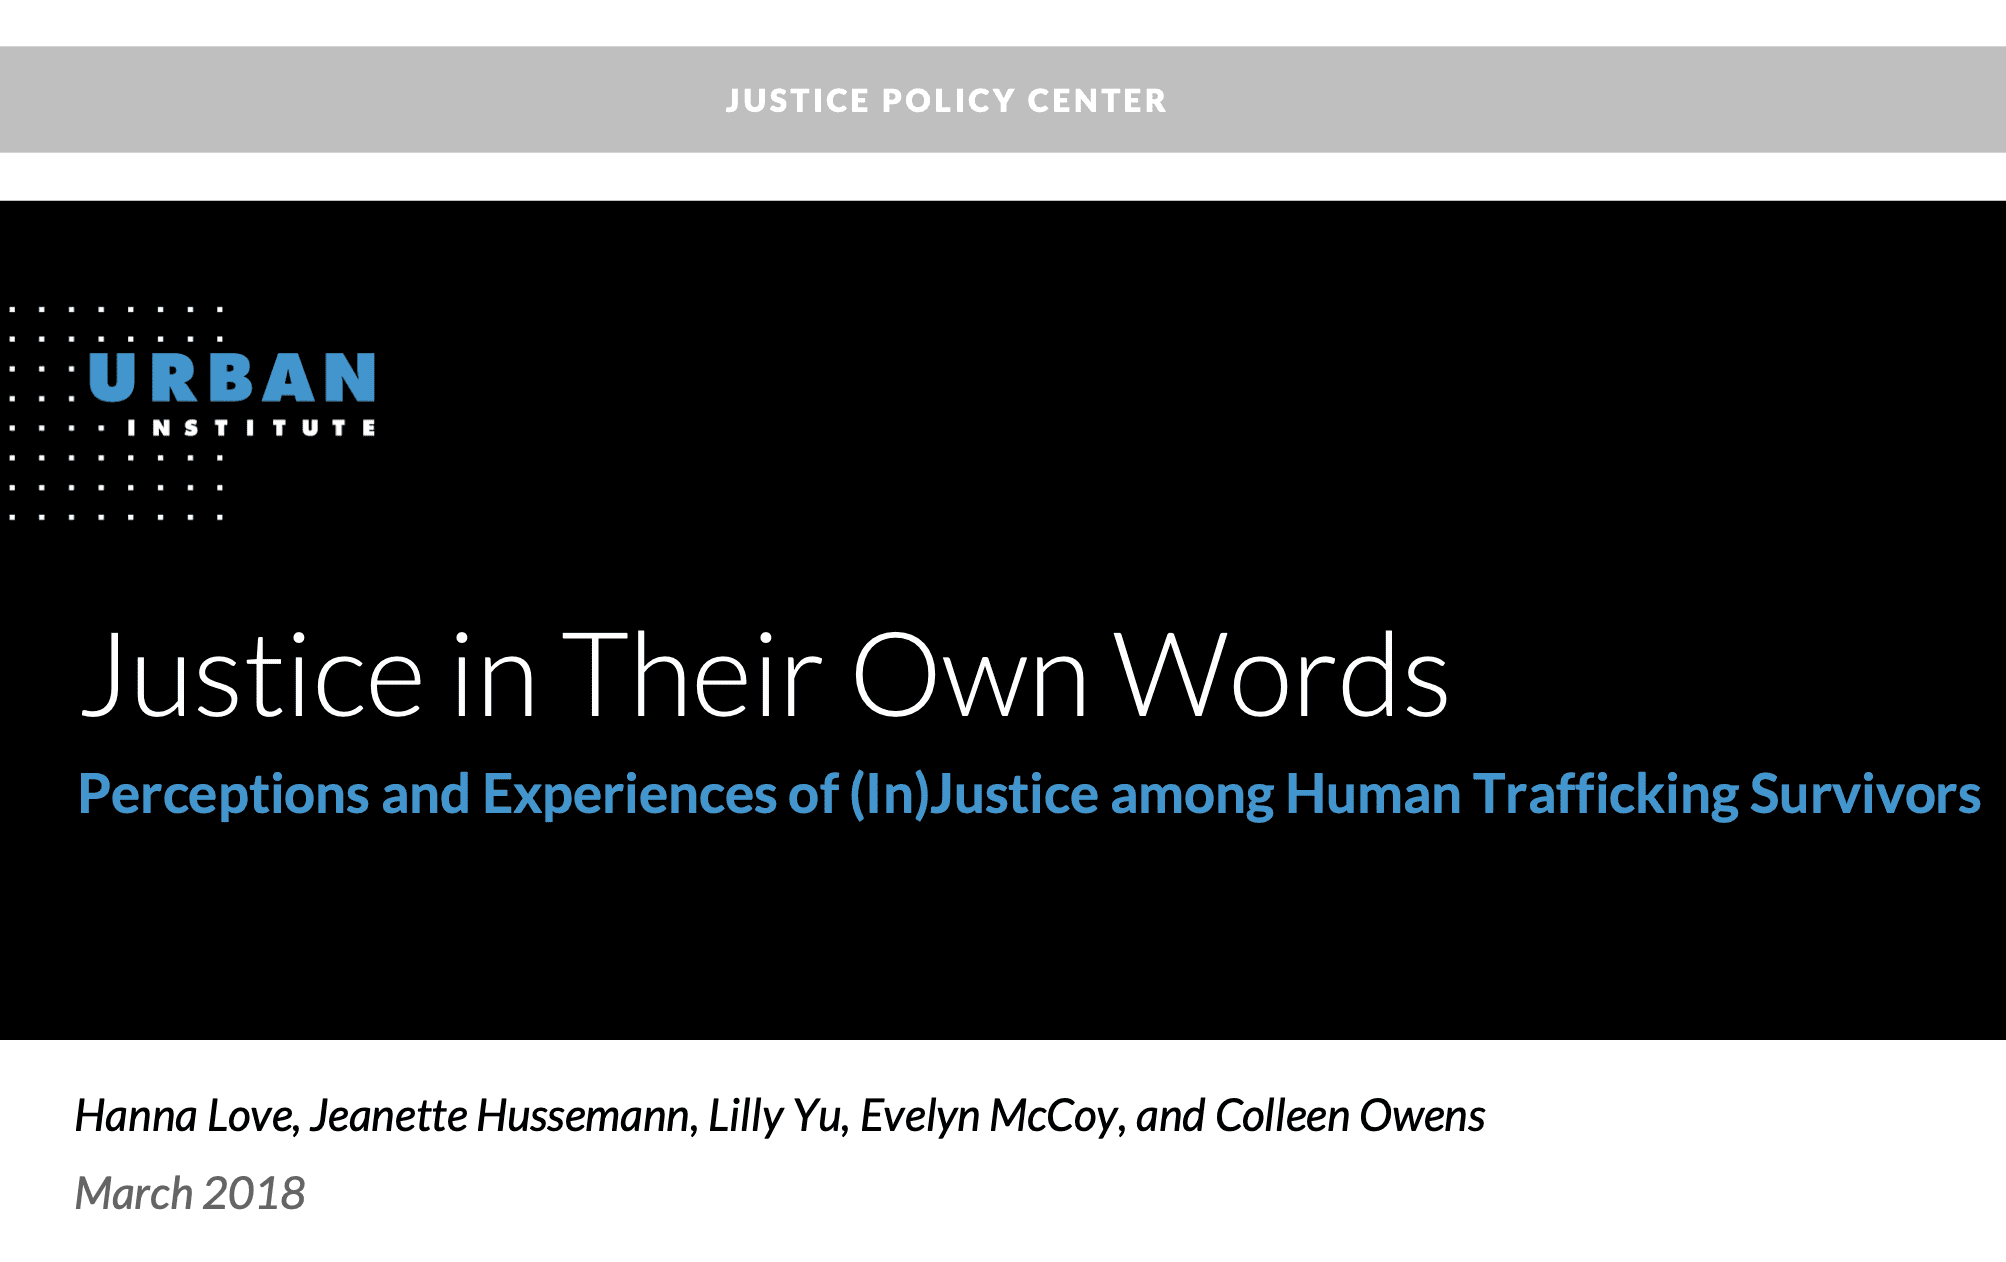 Justice in Their Own Words: Perceptions and Experiences of (In)justice among Human Trafficking Survivors